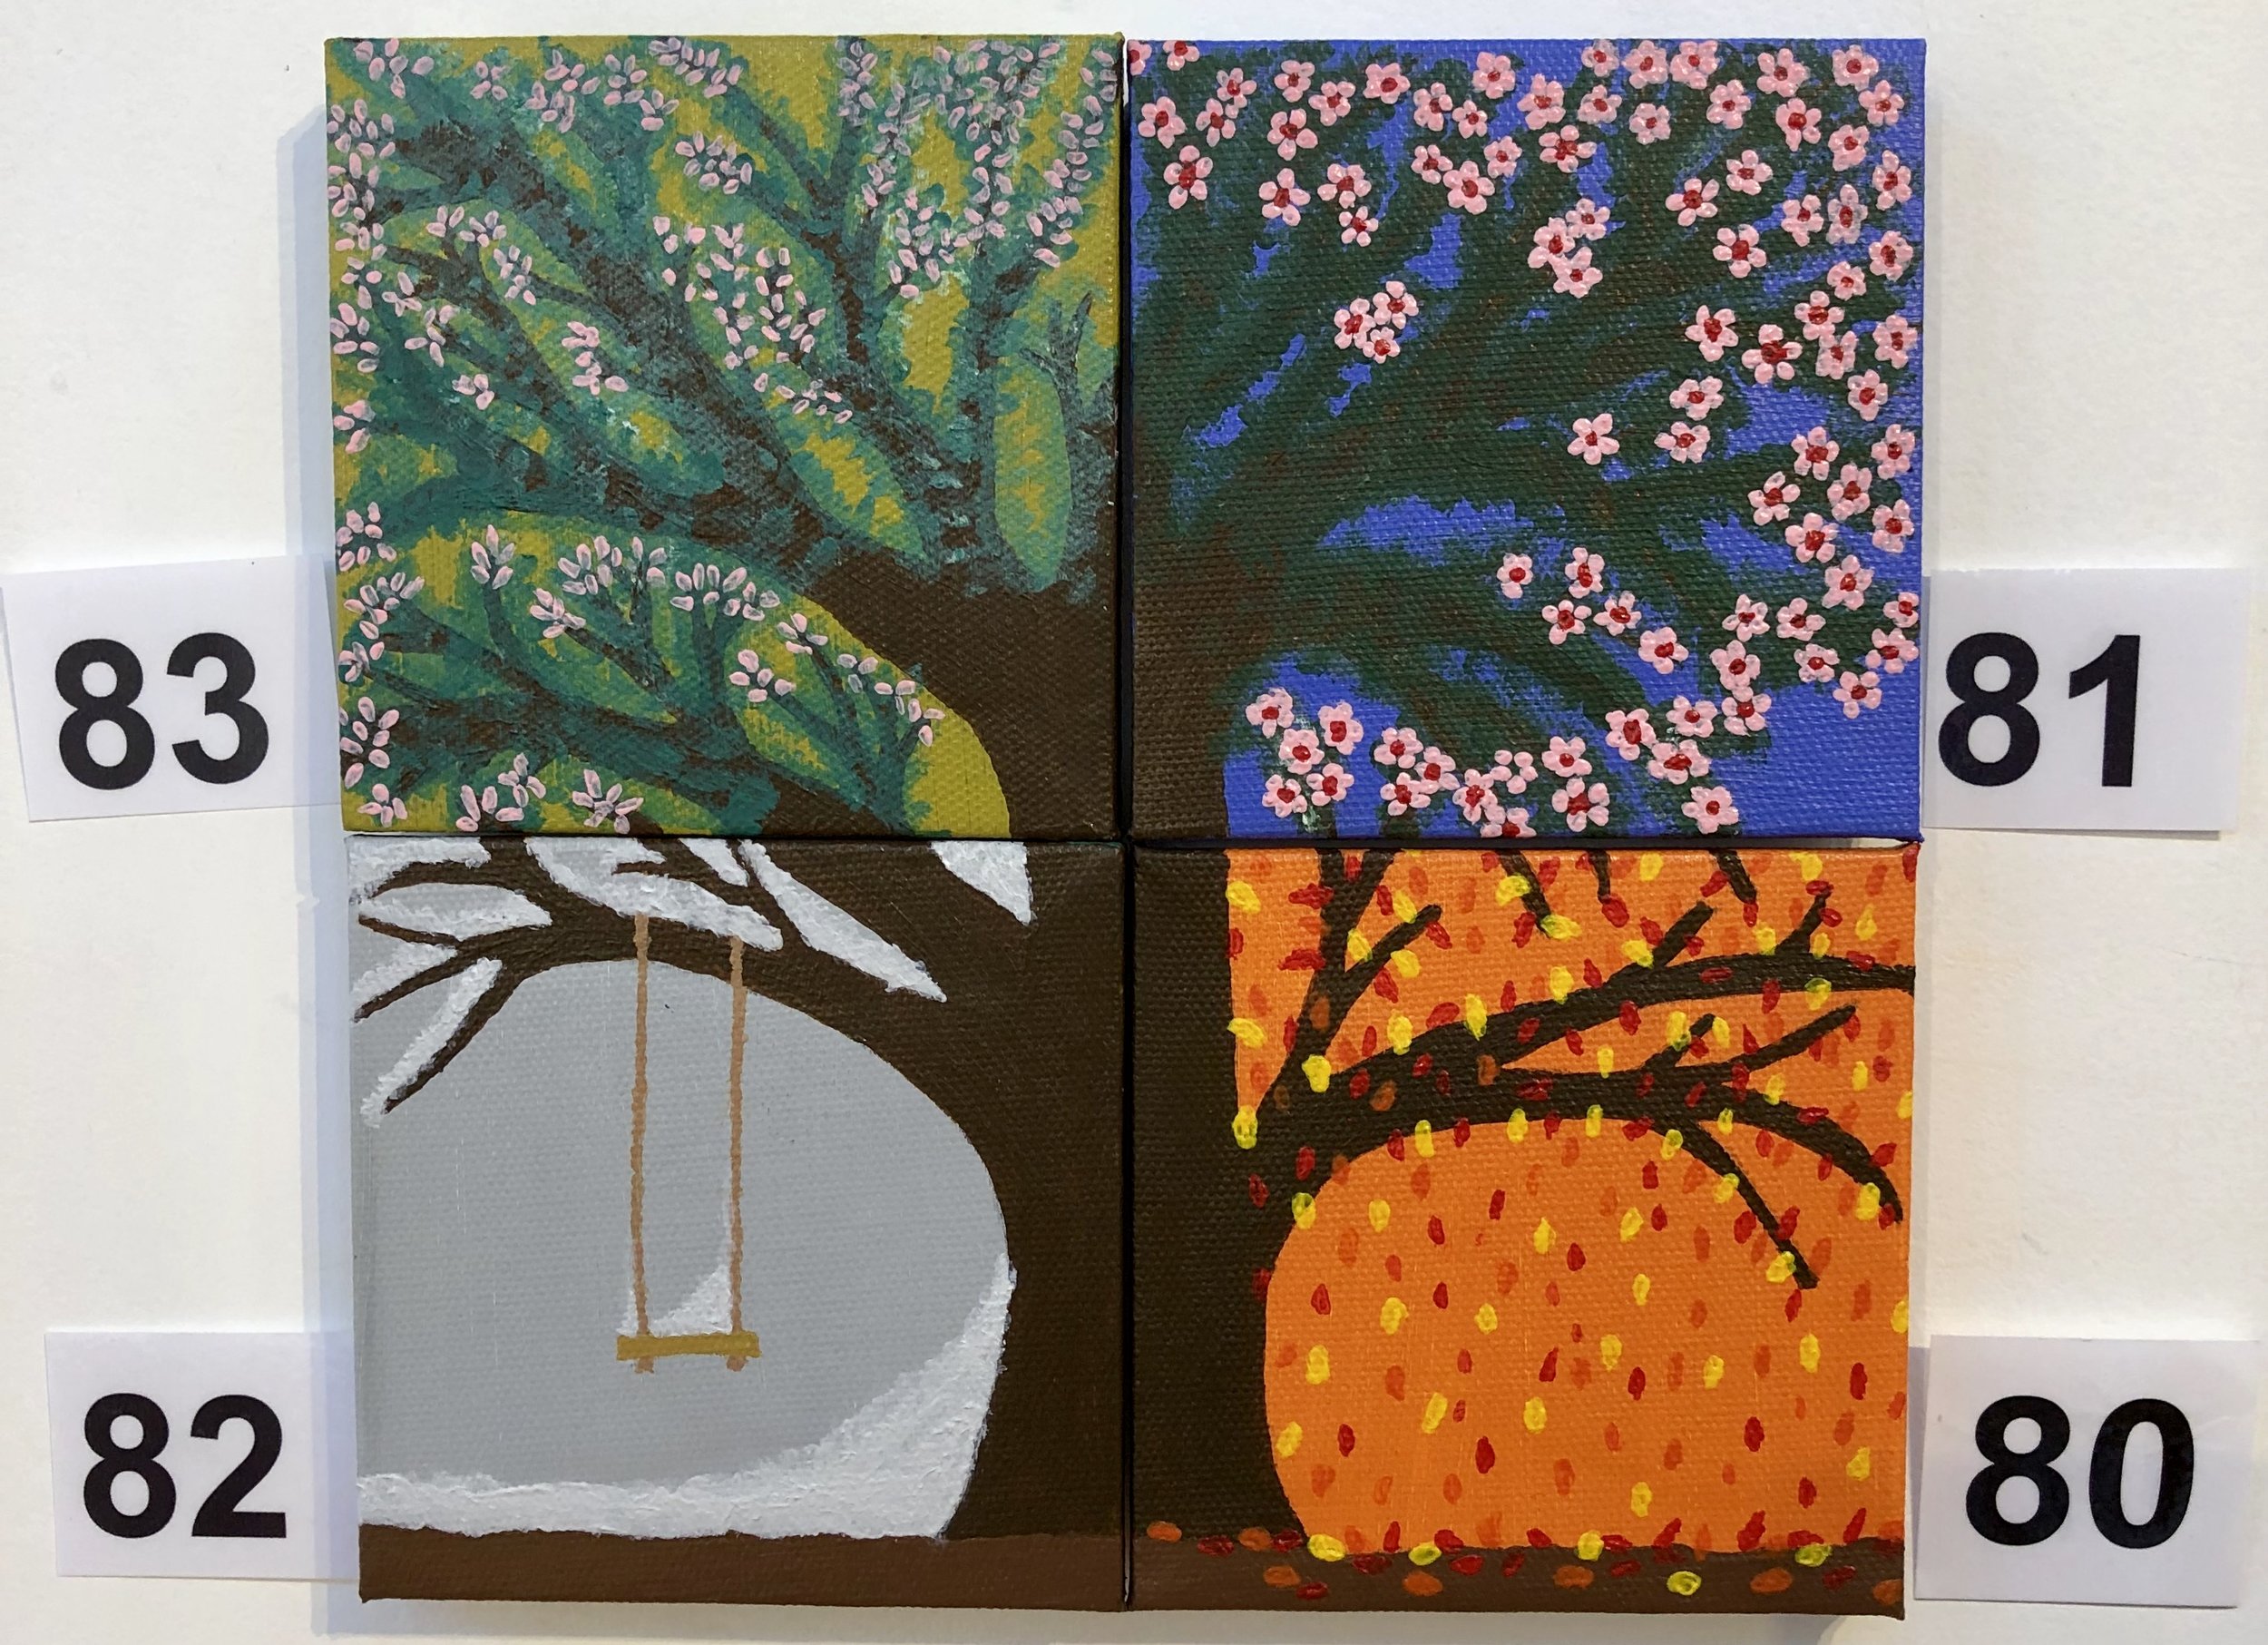 "Winter", "Spring", "Summer" and "Autumn" by Sharene Grant